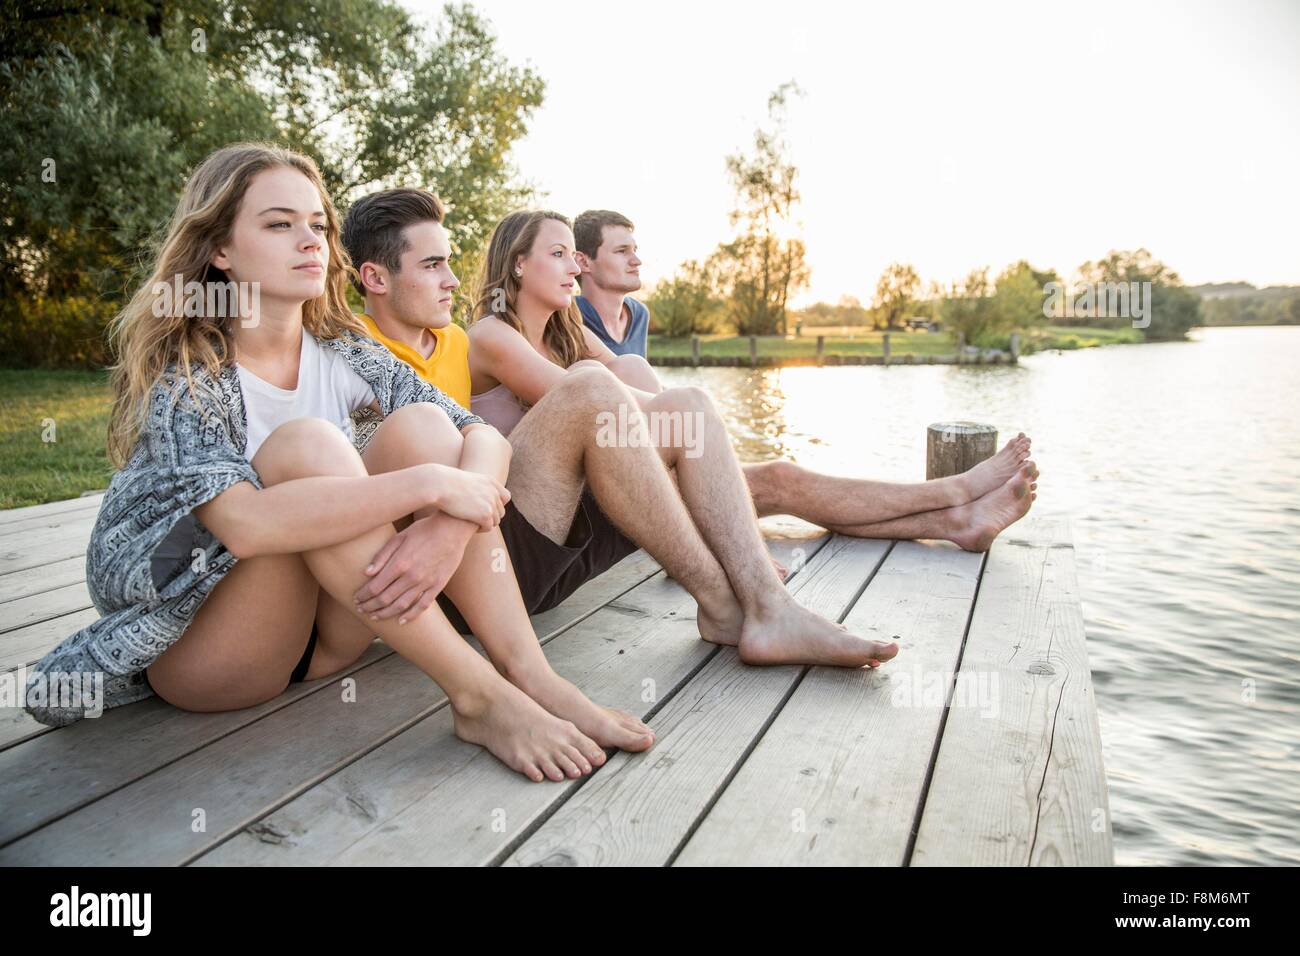 Groupe d'amis sitting on Jetty, relaxant Banque D'Images